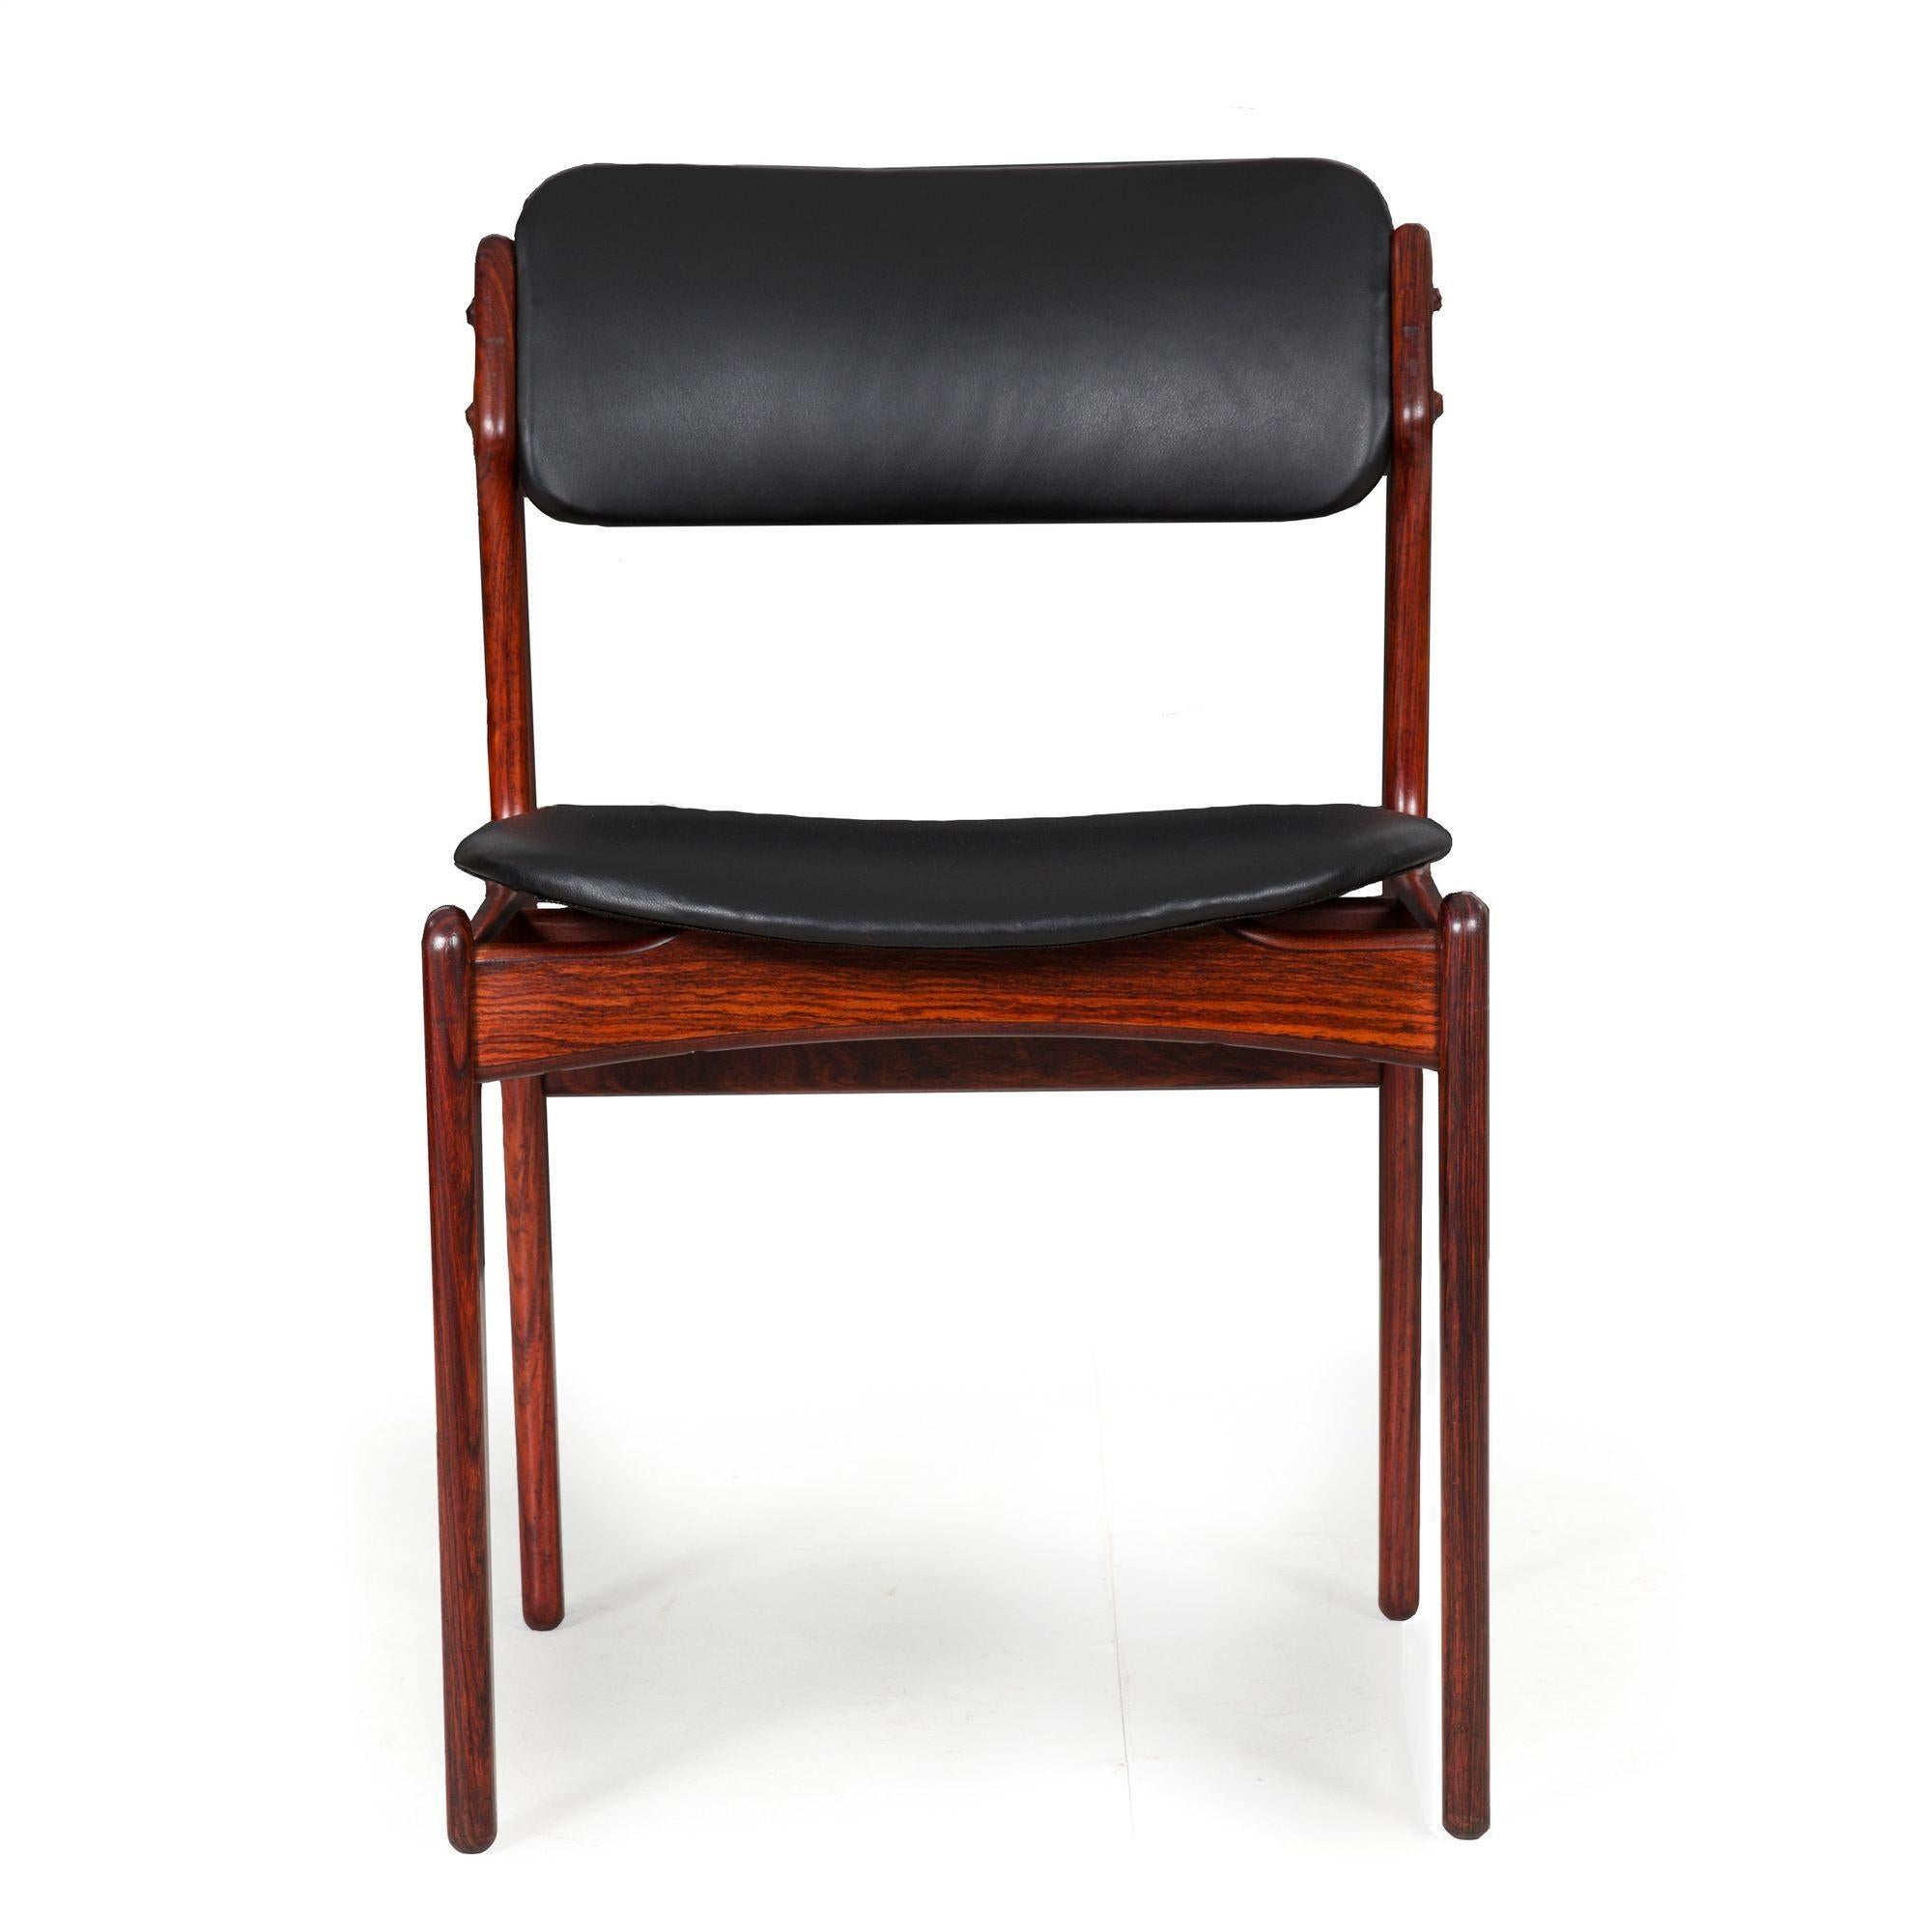 DANISH MODERN ROSEWOOD & BLACK LEATHER MODEL OD-49 SIDE CHAIR
By Erik Buch for O.D. Møbler  Denmark, circa 1980s
Item # 202WNP13P 

An iconic chair to the period, Erik Buch's 